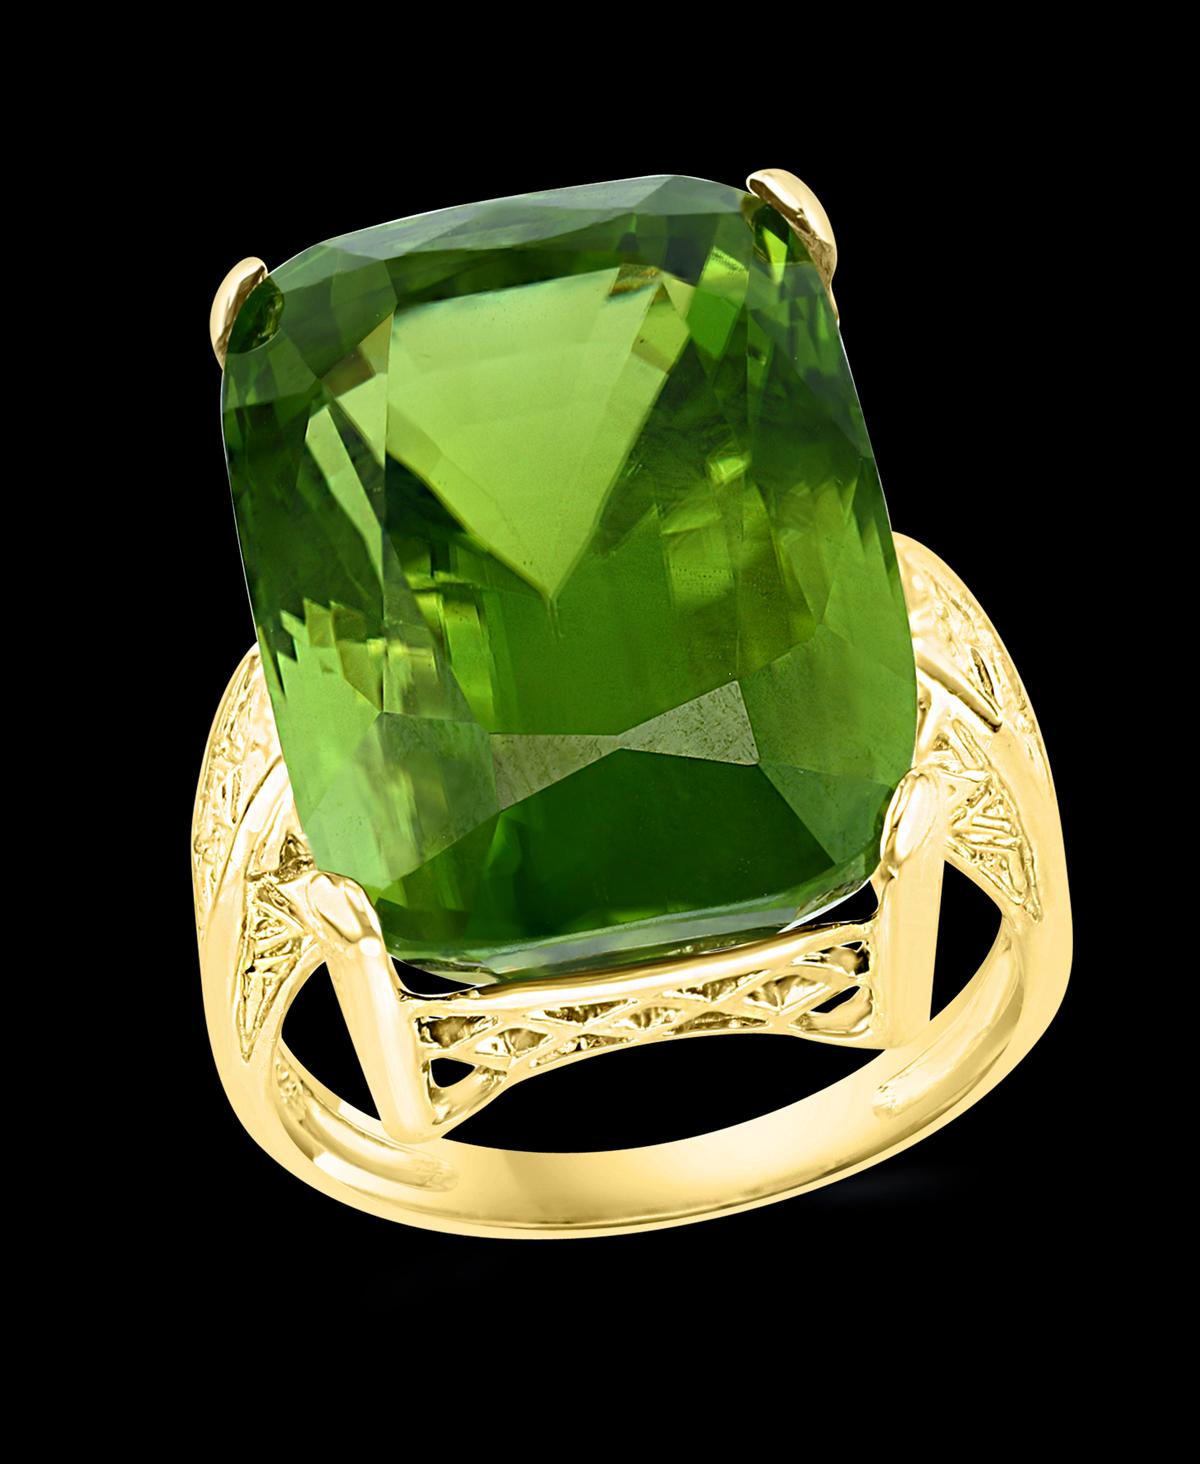 A classic, Cocktail ring 
Huge 34.06  Carat of very clean no inclusion  Peridot full of luster and shine  ring
Gold: 14 carat Yellow gold 
Weight: 12 gram
GIA Certified 
Certificate Report # 2205658214
Shape Cushion
Size 7.5
If you need the ring